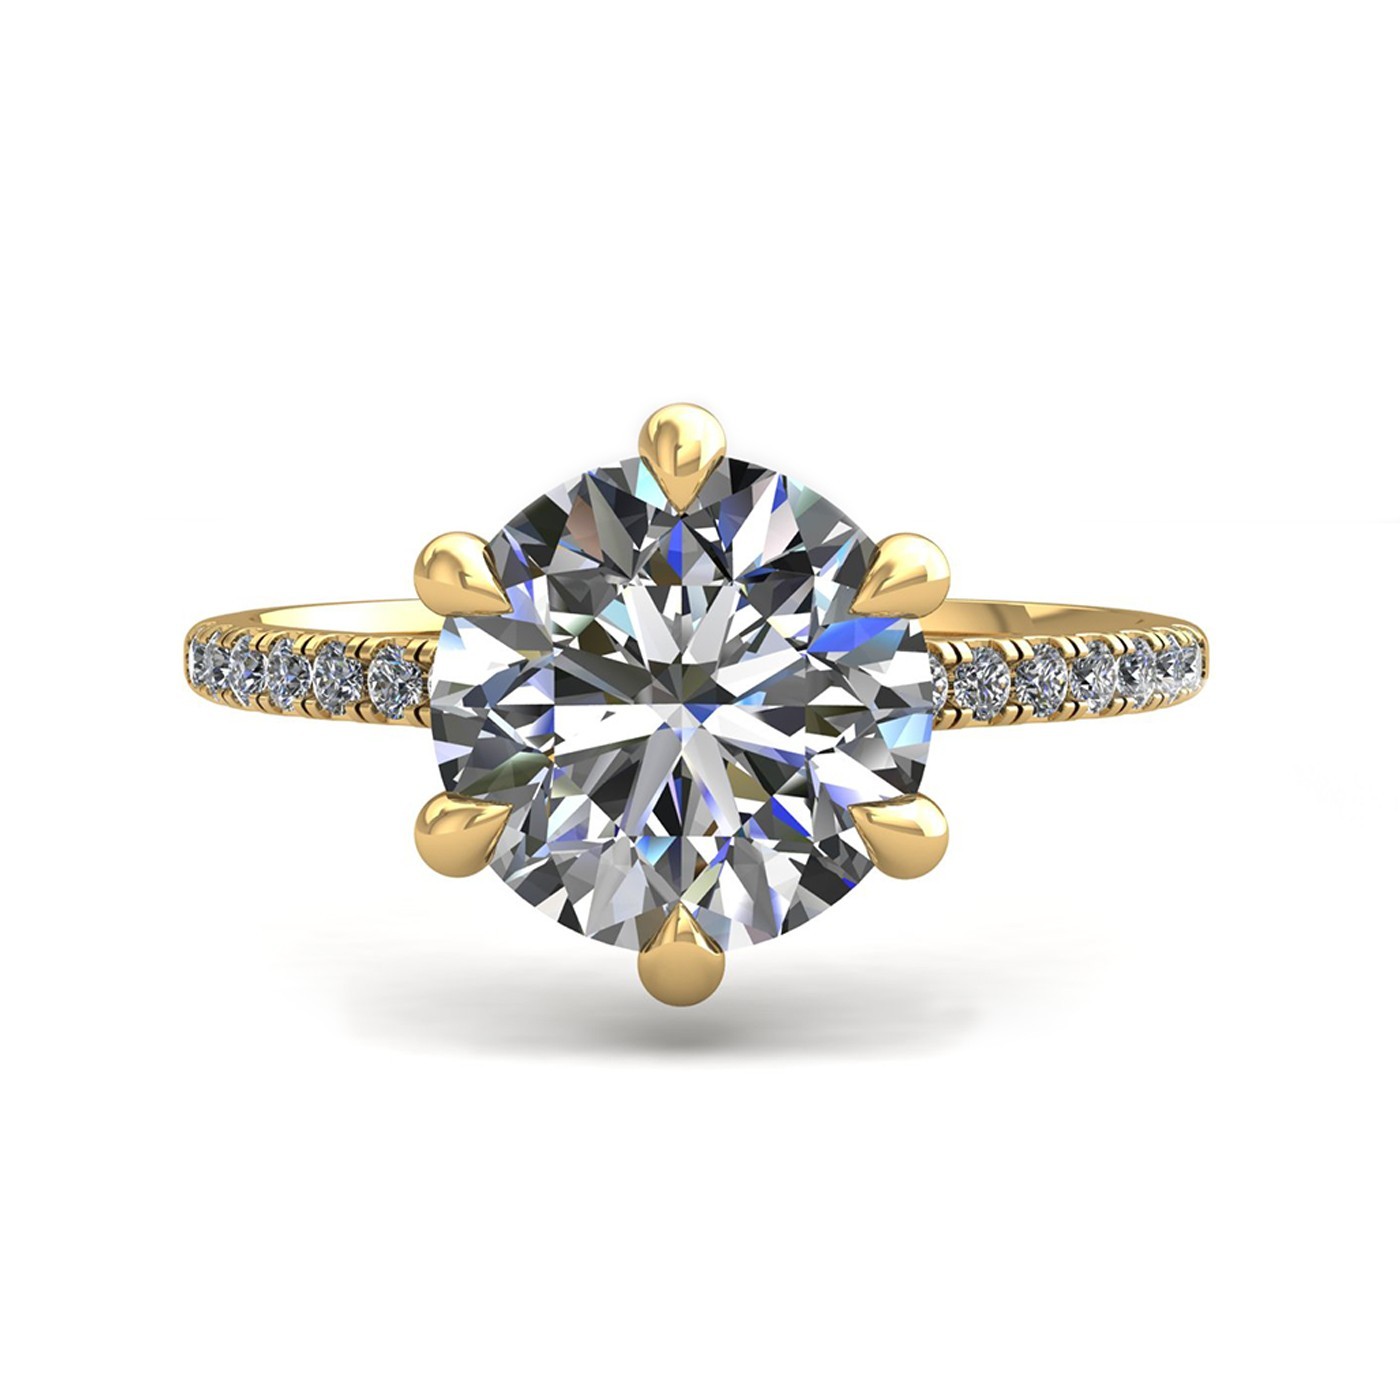 18k yellow gold 2,00 ct 6 prongs round cut diamond engagement ring with whisper thin pavÉ set band